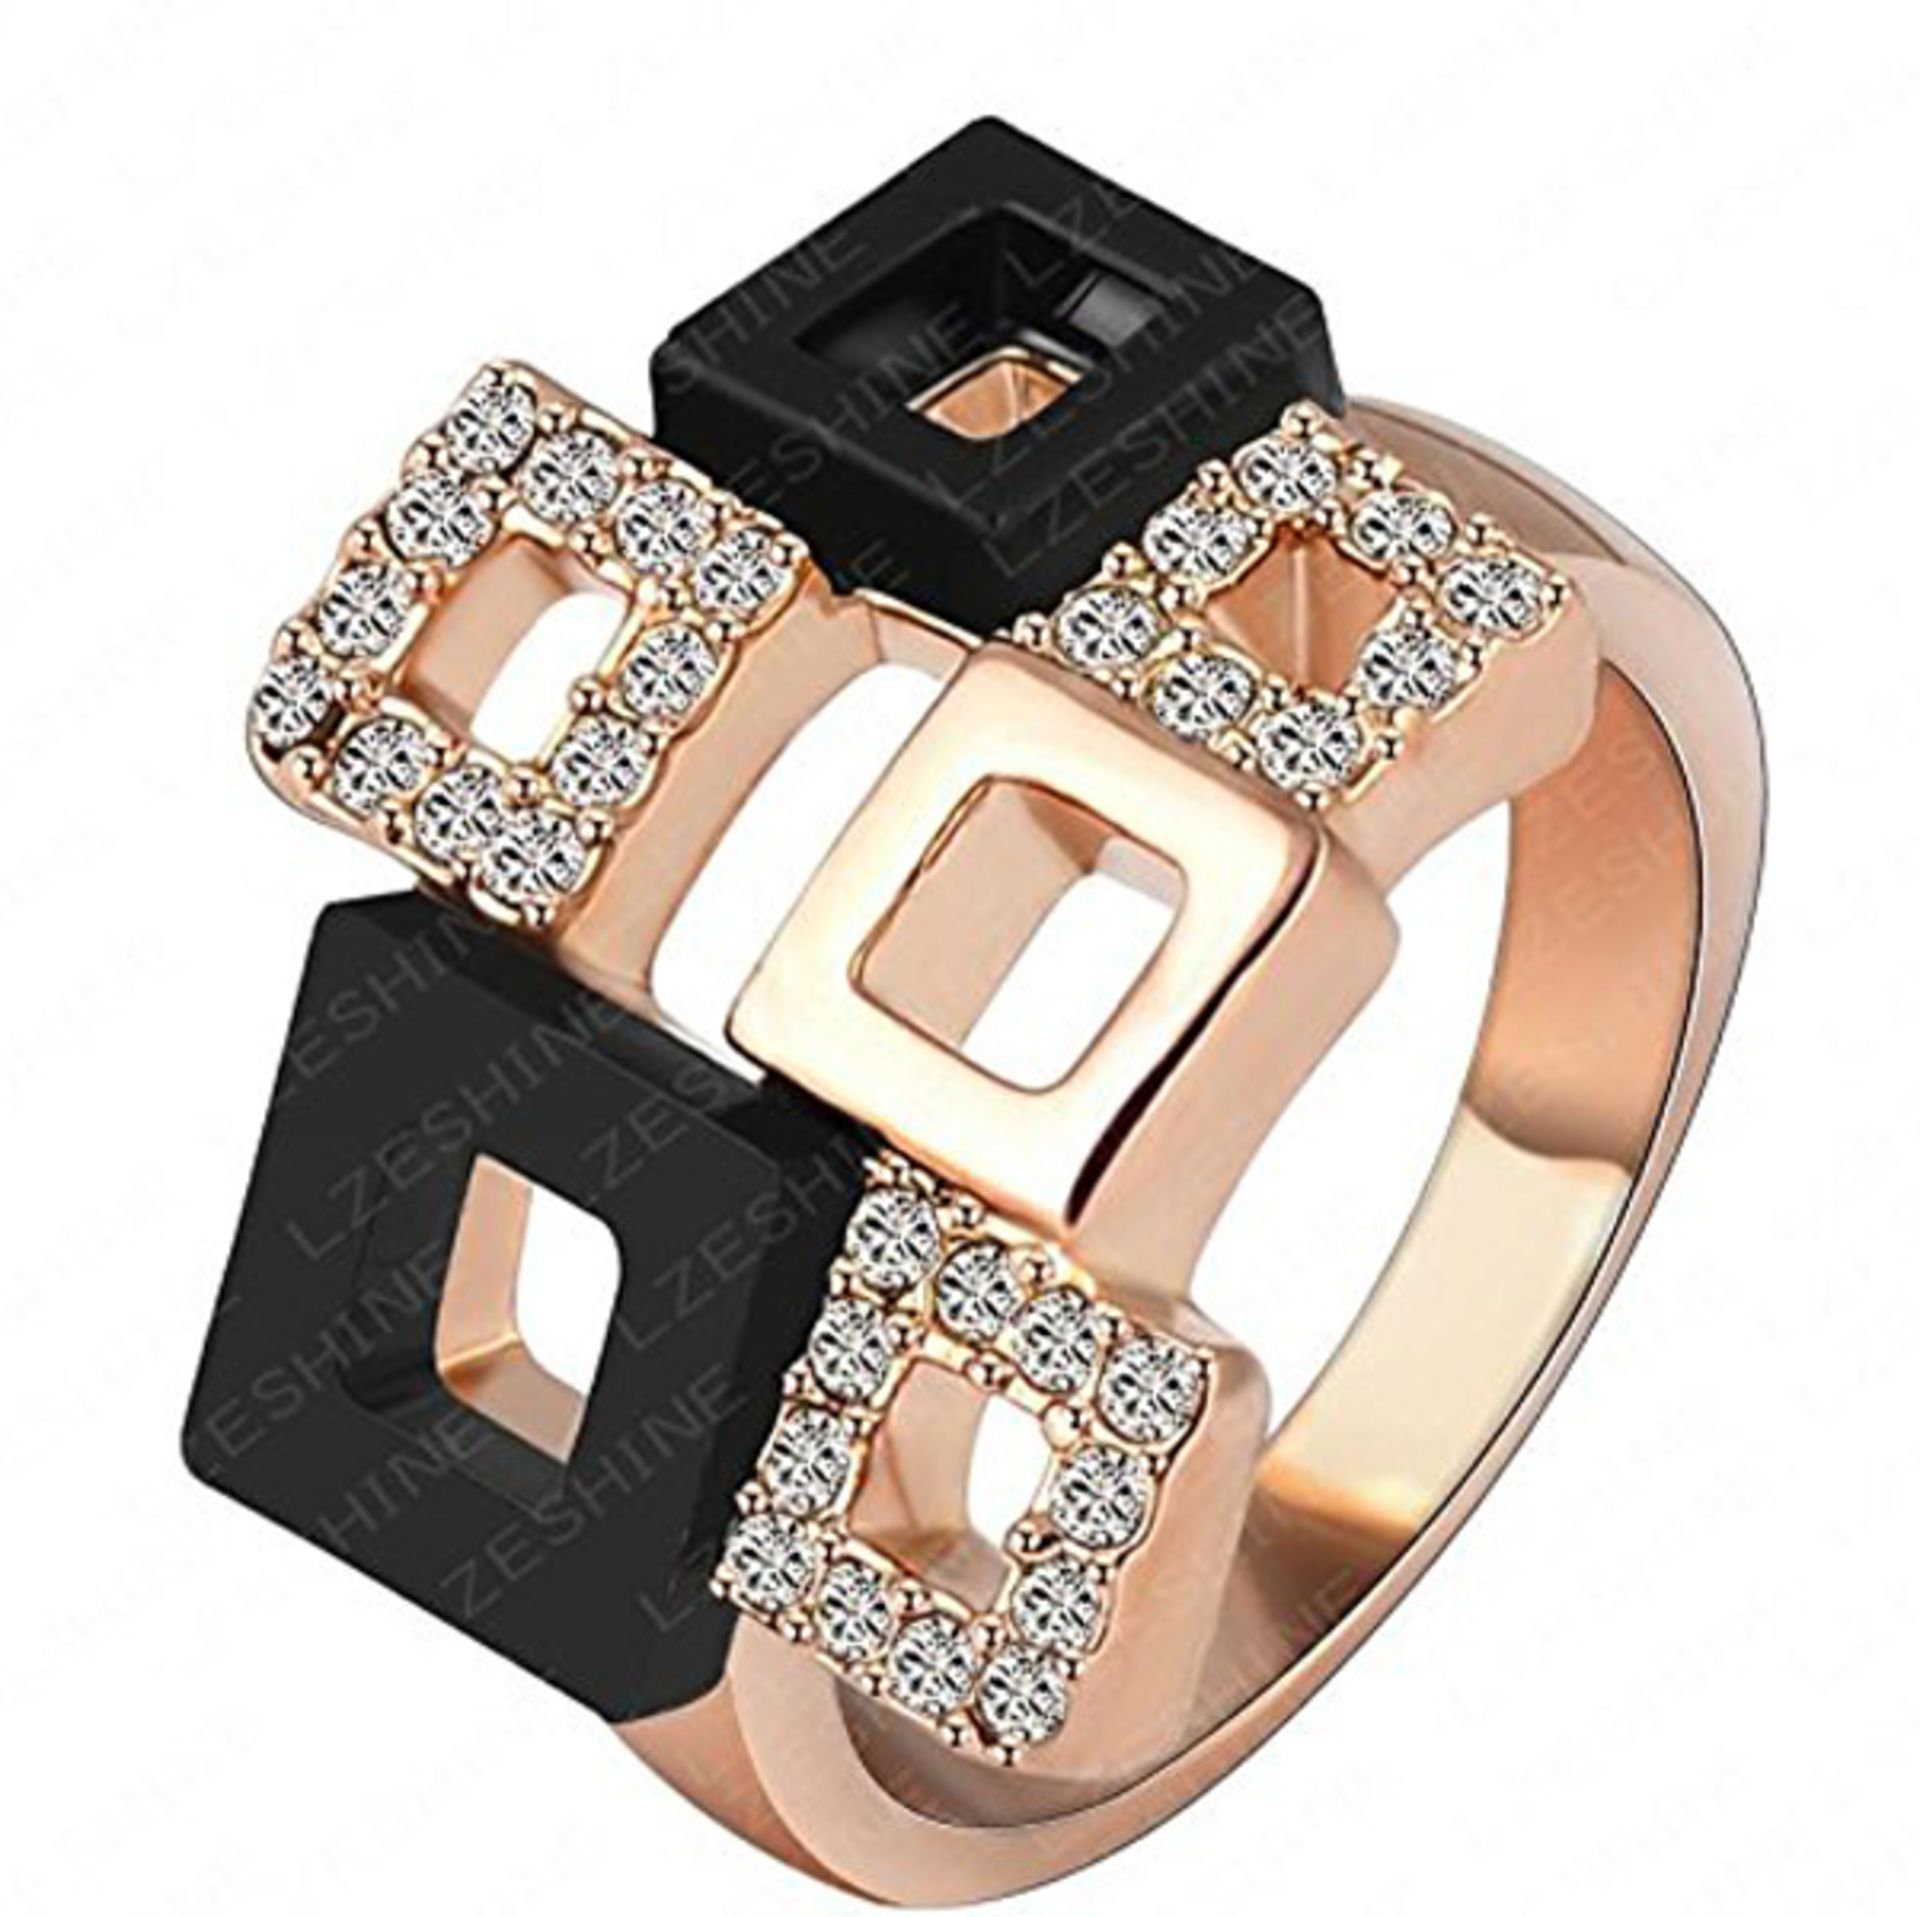 V *TRADE QTY* Brand New Rose Colour Modern Square Design Ring with White Stones X 3 YOUR BID PRICE